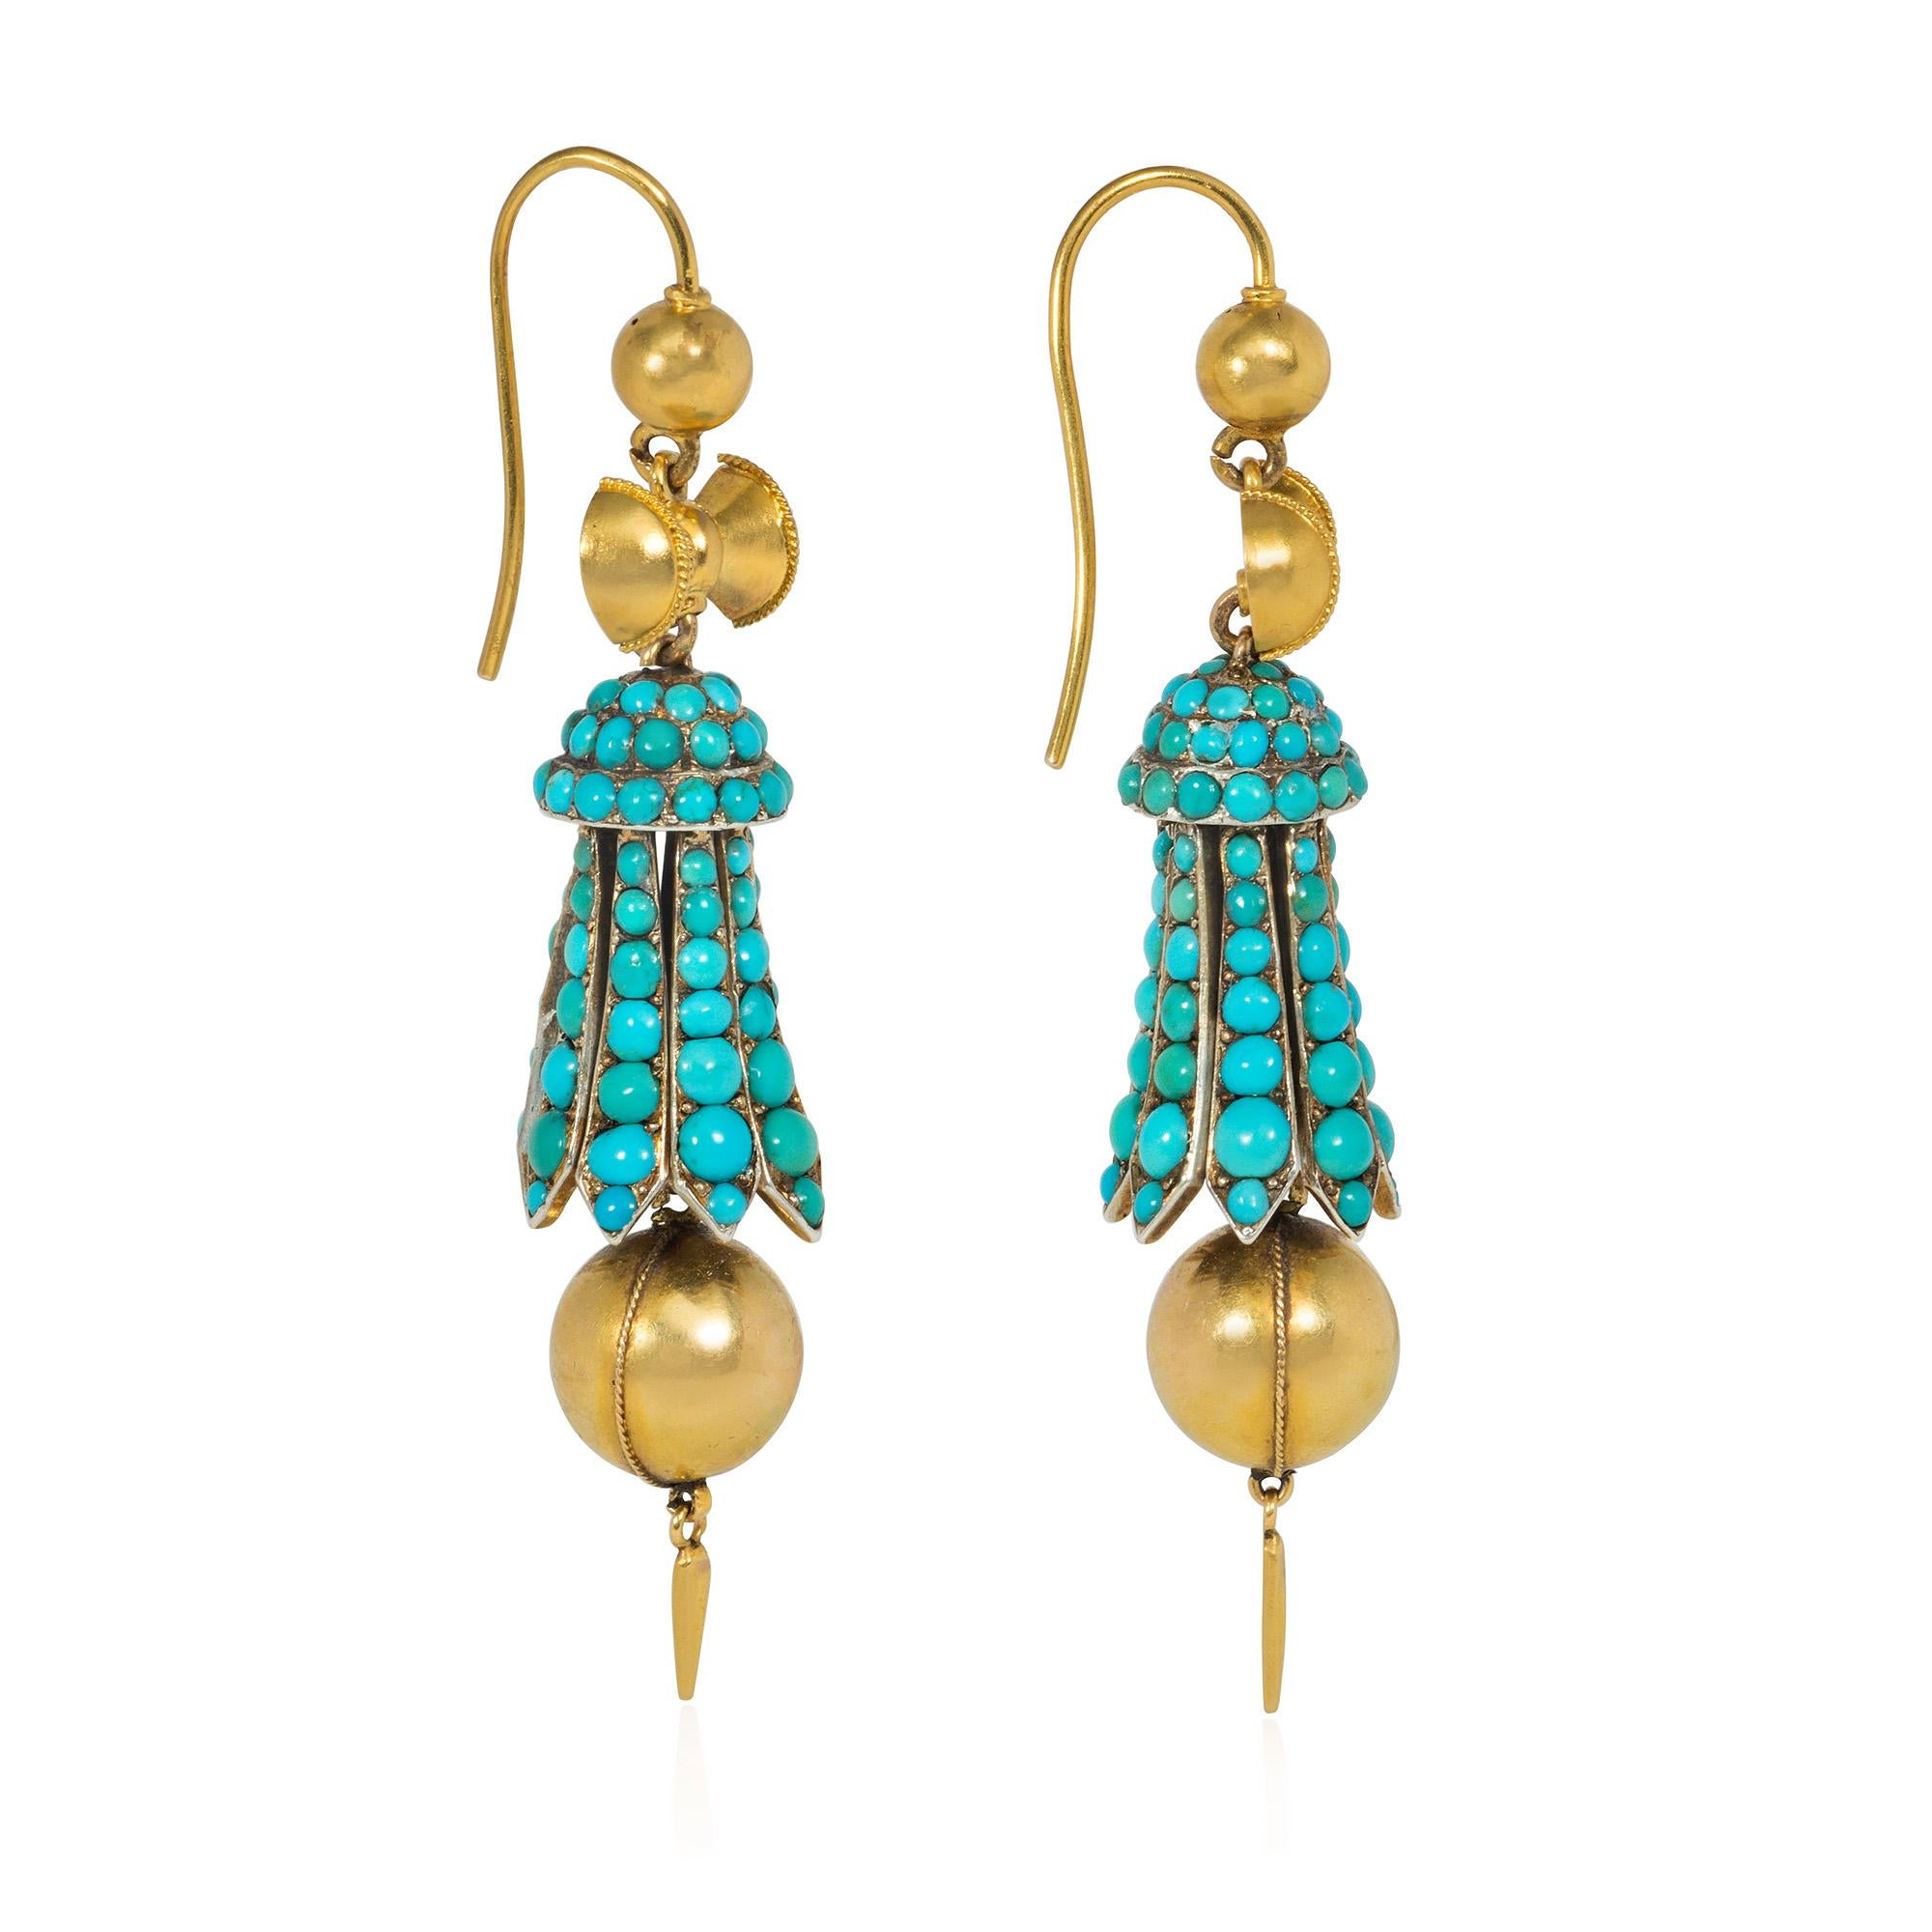 An antique Victorian period pair of turquoise and gold pendant earrings, the gold bead tops suspending gold rope twist-adorned barbells, and further suspending pavé turquoise domes and flared tassel-like elements, ending in gold orbs with